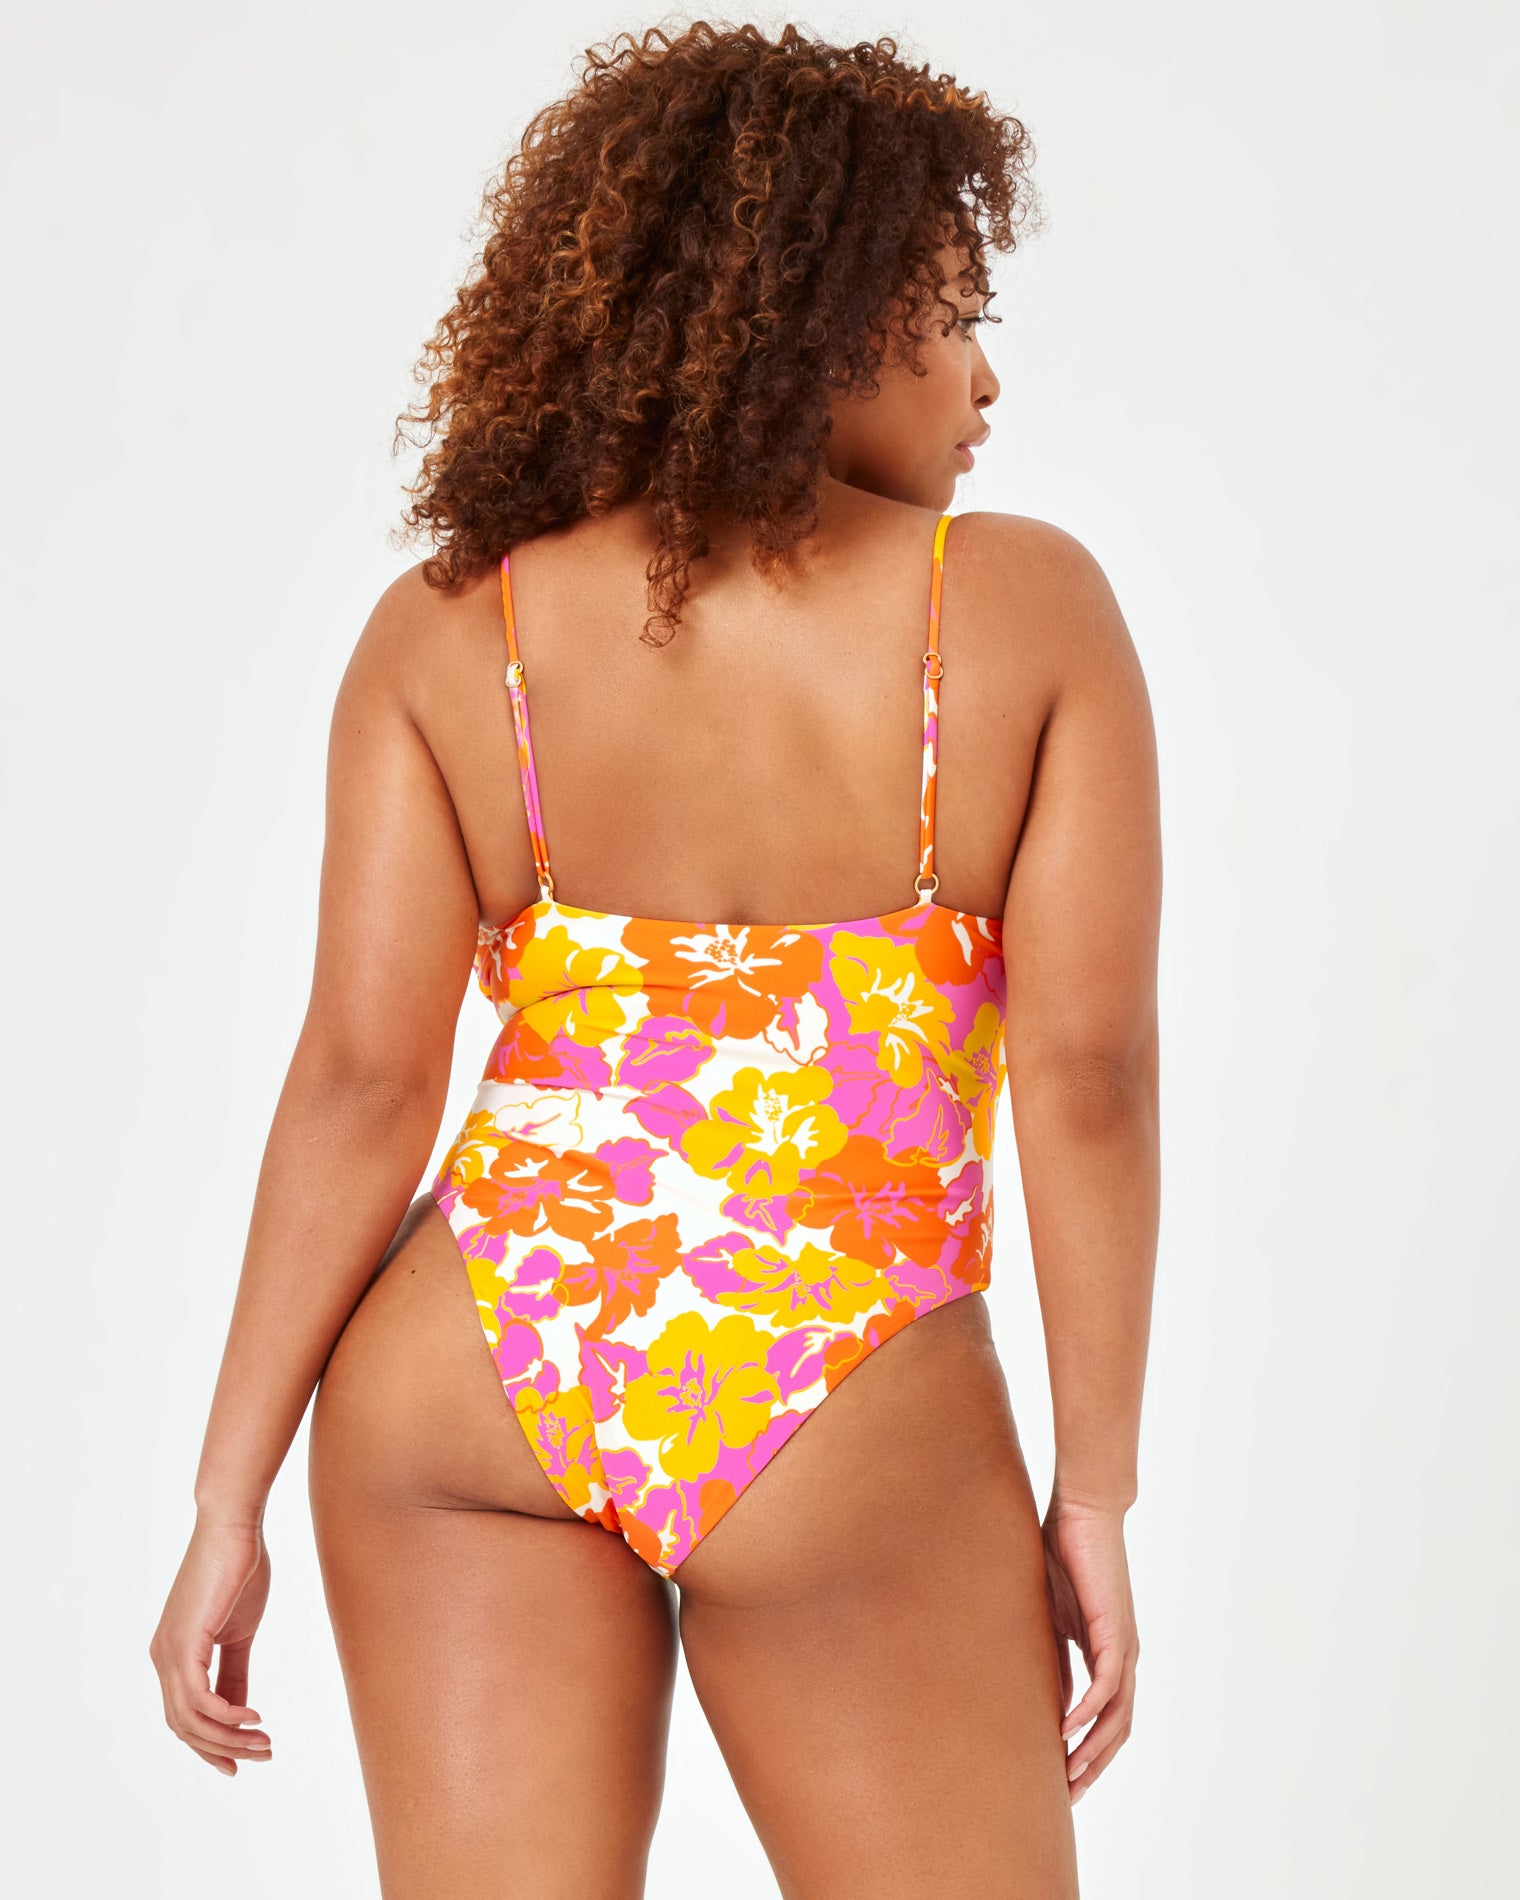 Eco Chic Econyl® Eco Piper One Piece Swimsuit - Bliss and Blossom Bliss and Blossom | Model: Amber (size: XL)